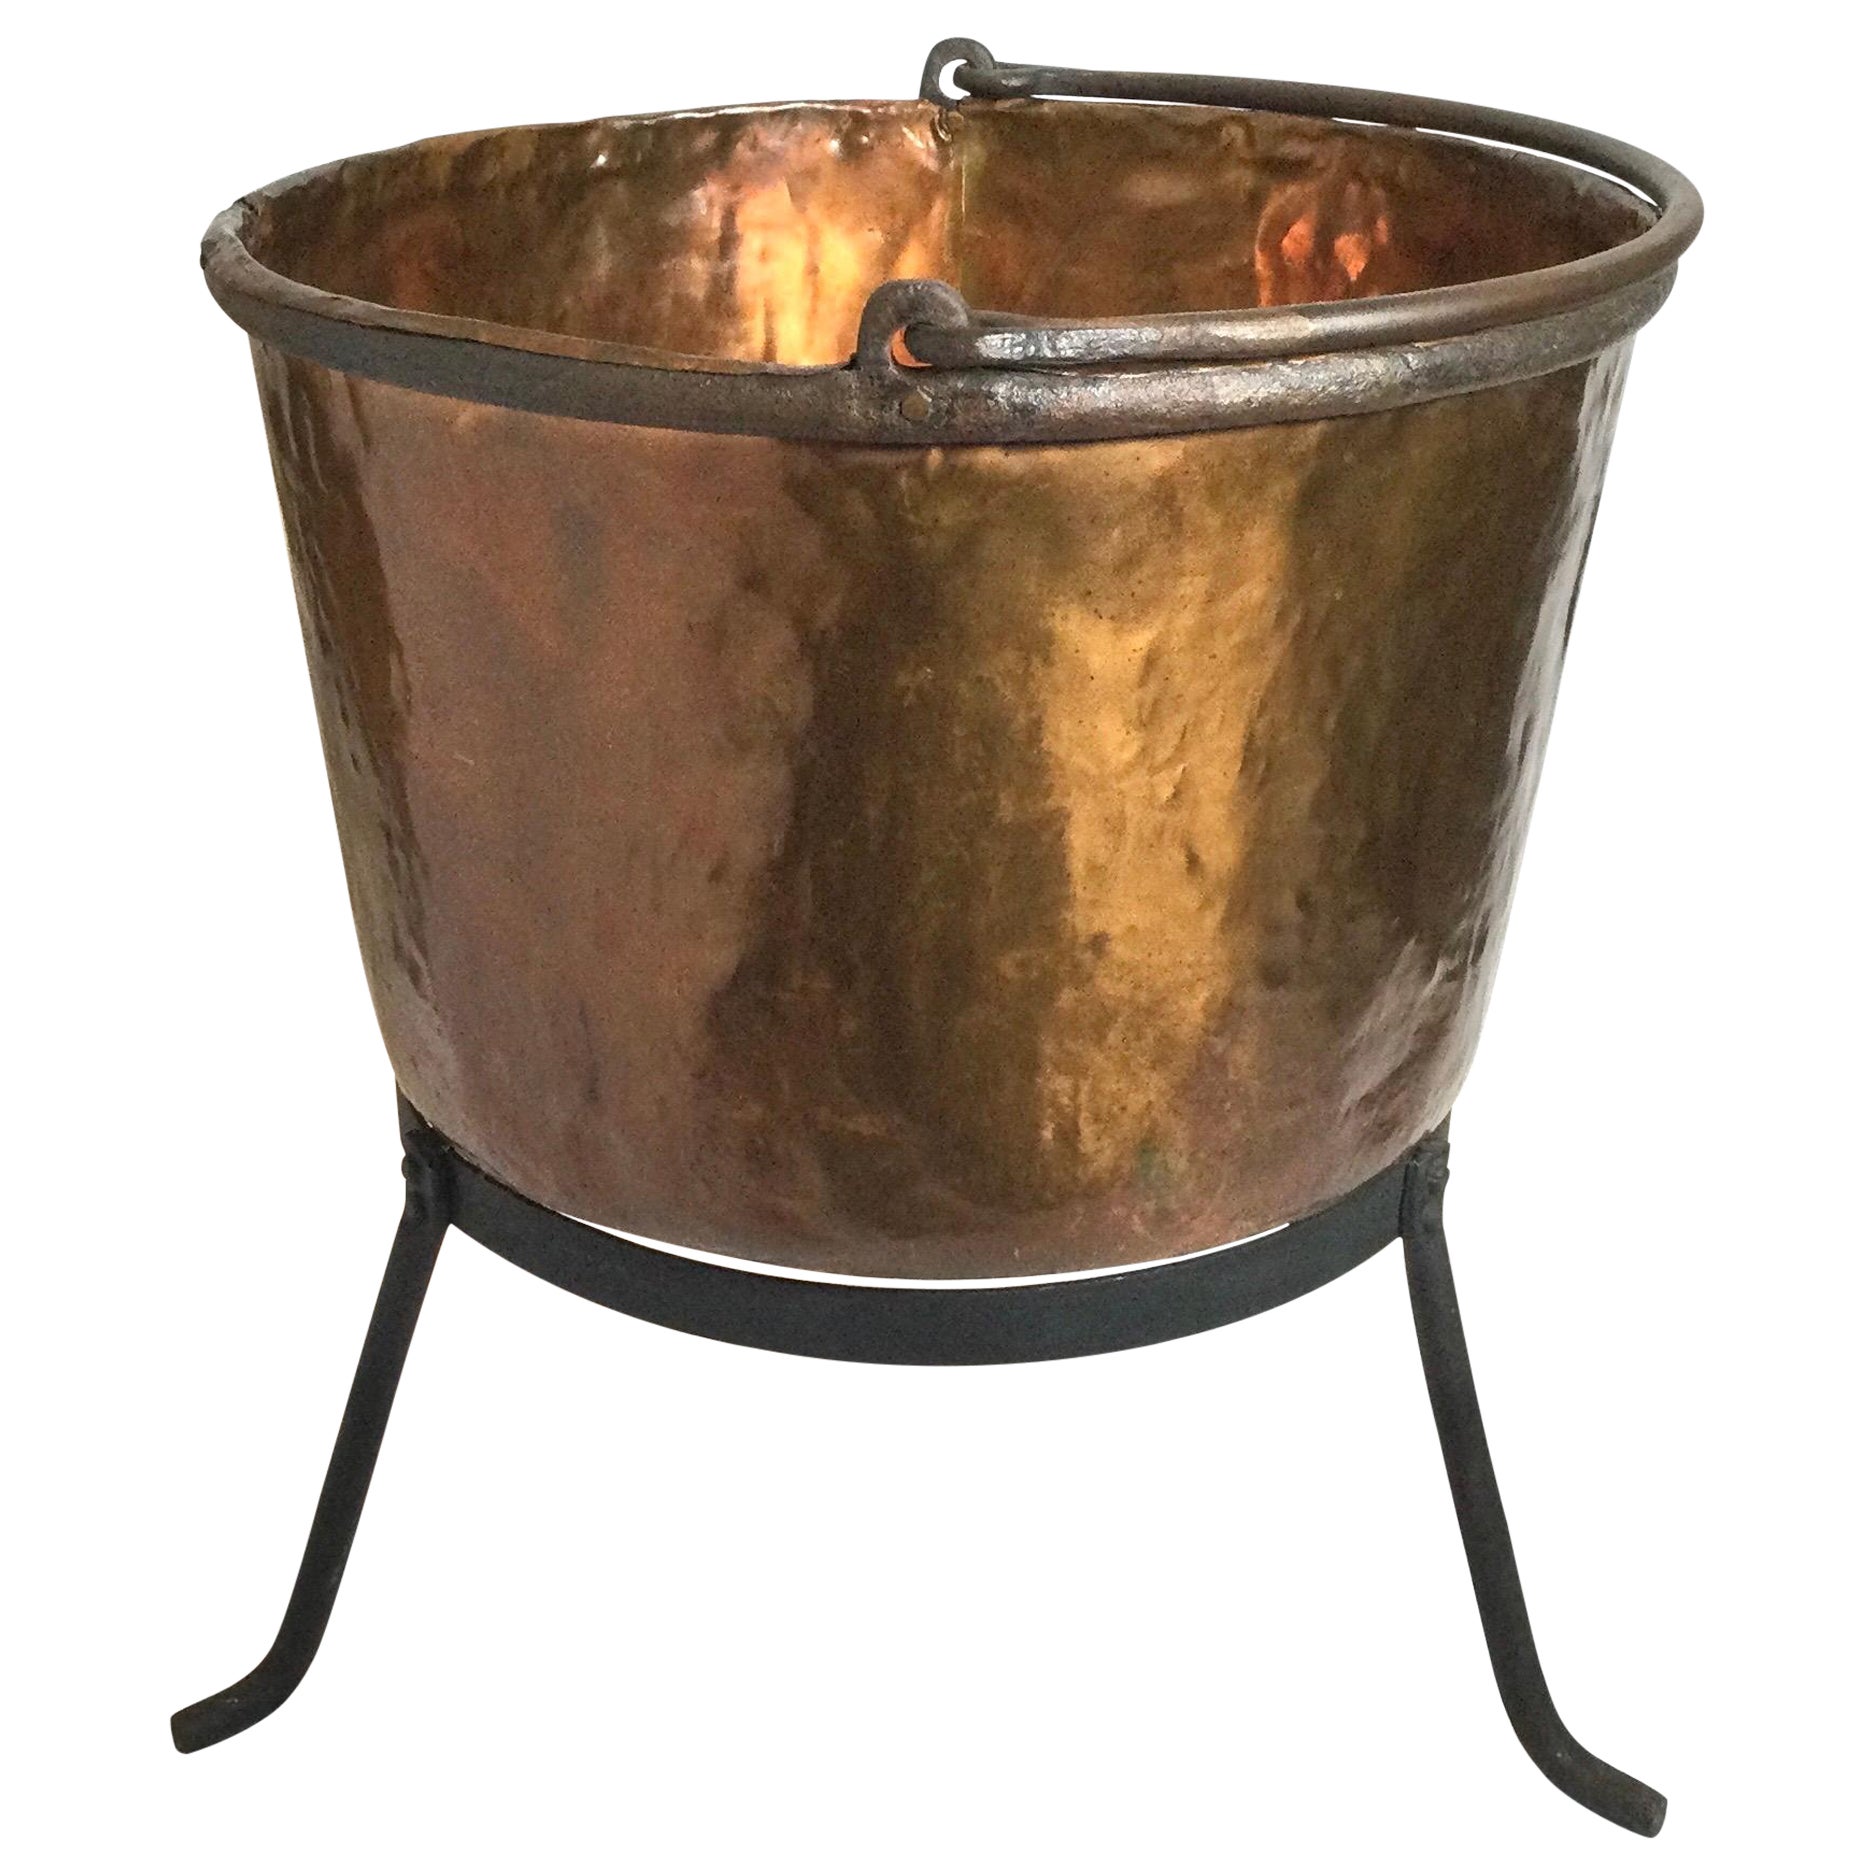 American Copper and Wrought Iron Cauldron on Stand